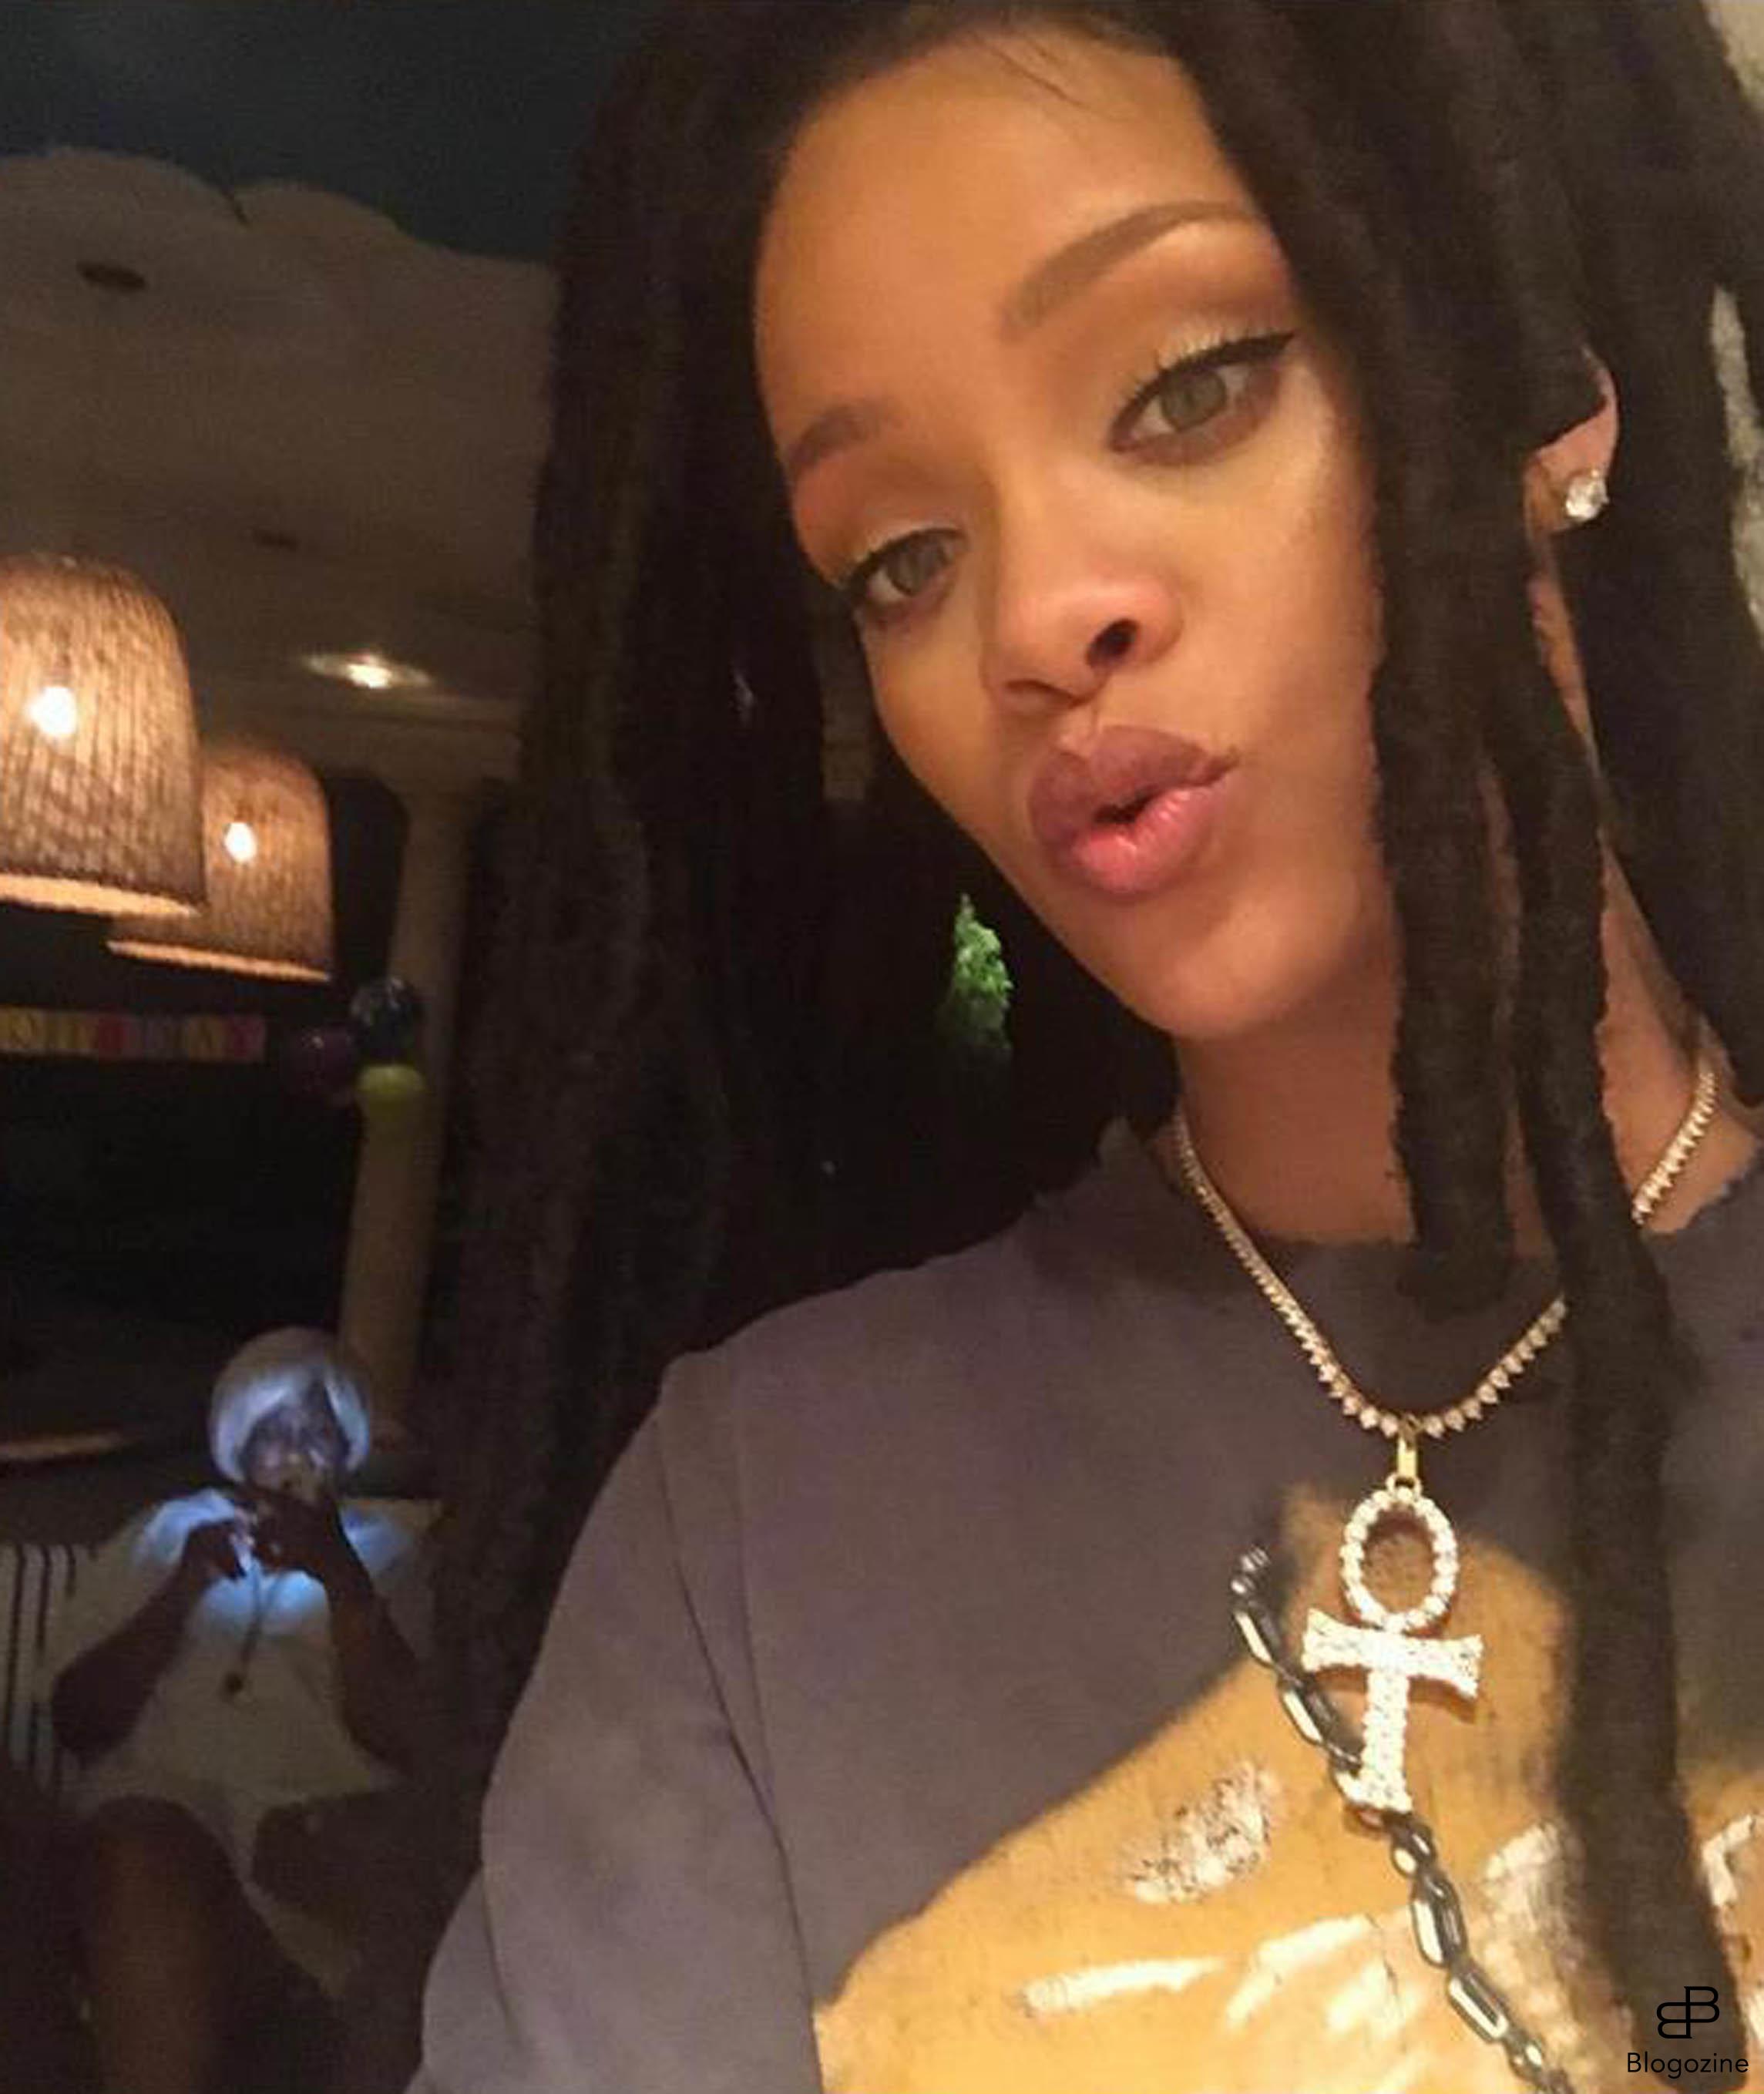 6334023 10-10-2016 Celebrity Selfies Pictured: Rihanna PLANET PHOTOS www.planetphotos.co.uk info@planetphotos.co.uk +44 (0)20 8883 1438 DISTR. STELLA PICTURES